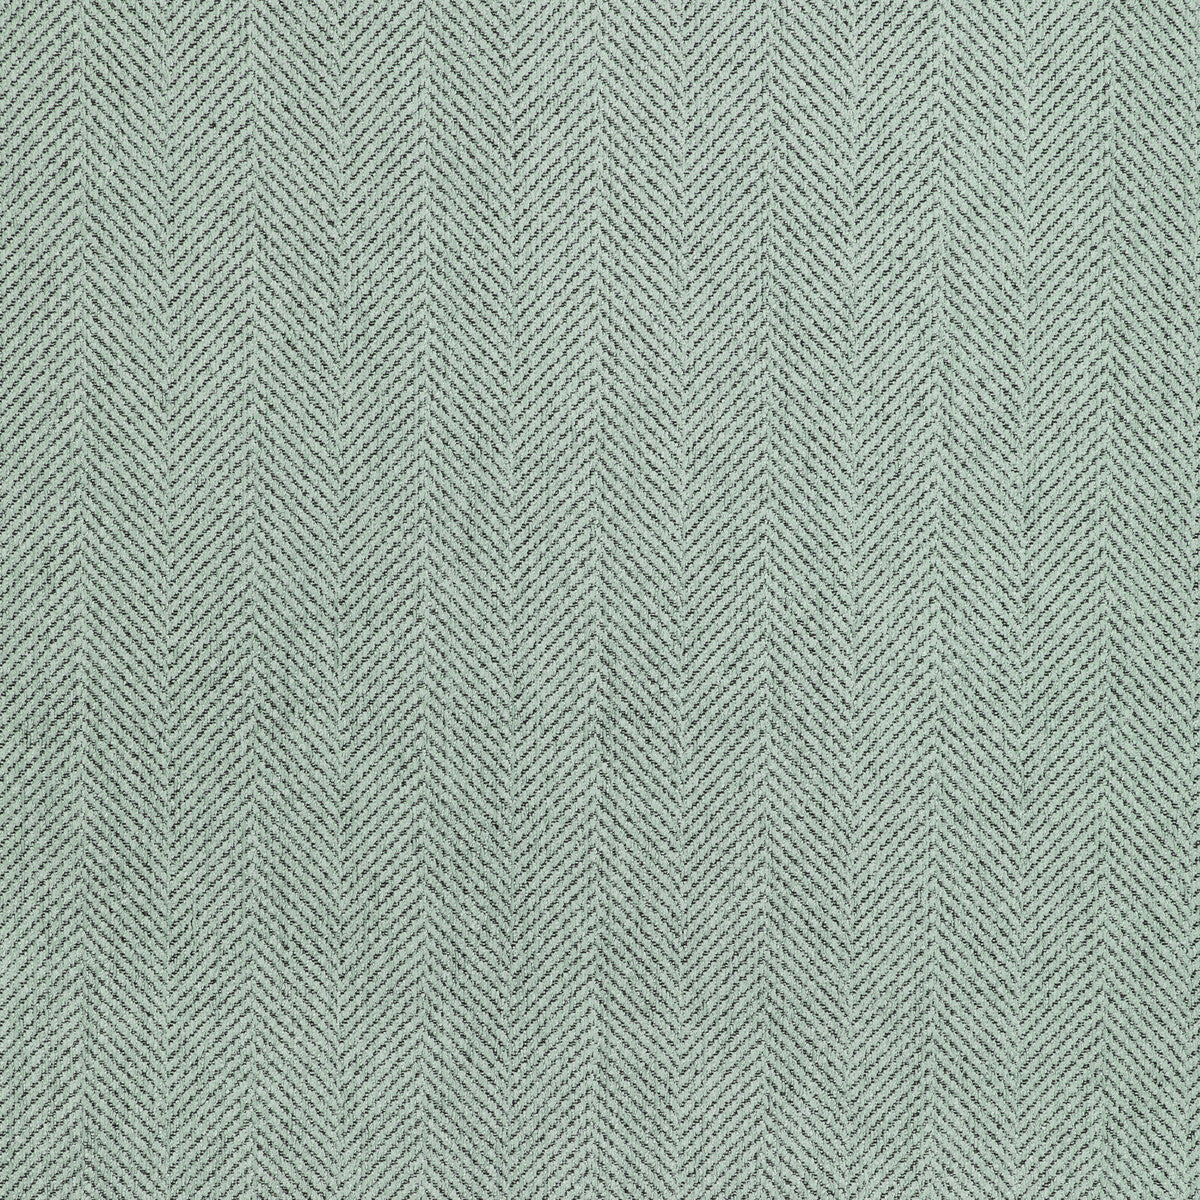 Healing Touch fabric in rivers edge color - pattern 36389.35.0 - by Kravet Design in the Crypton Home - Celliant collection